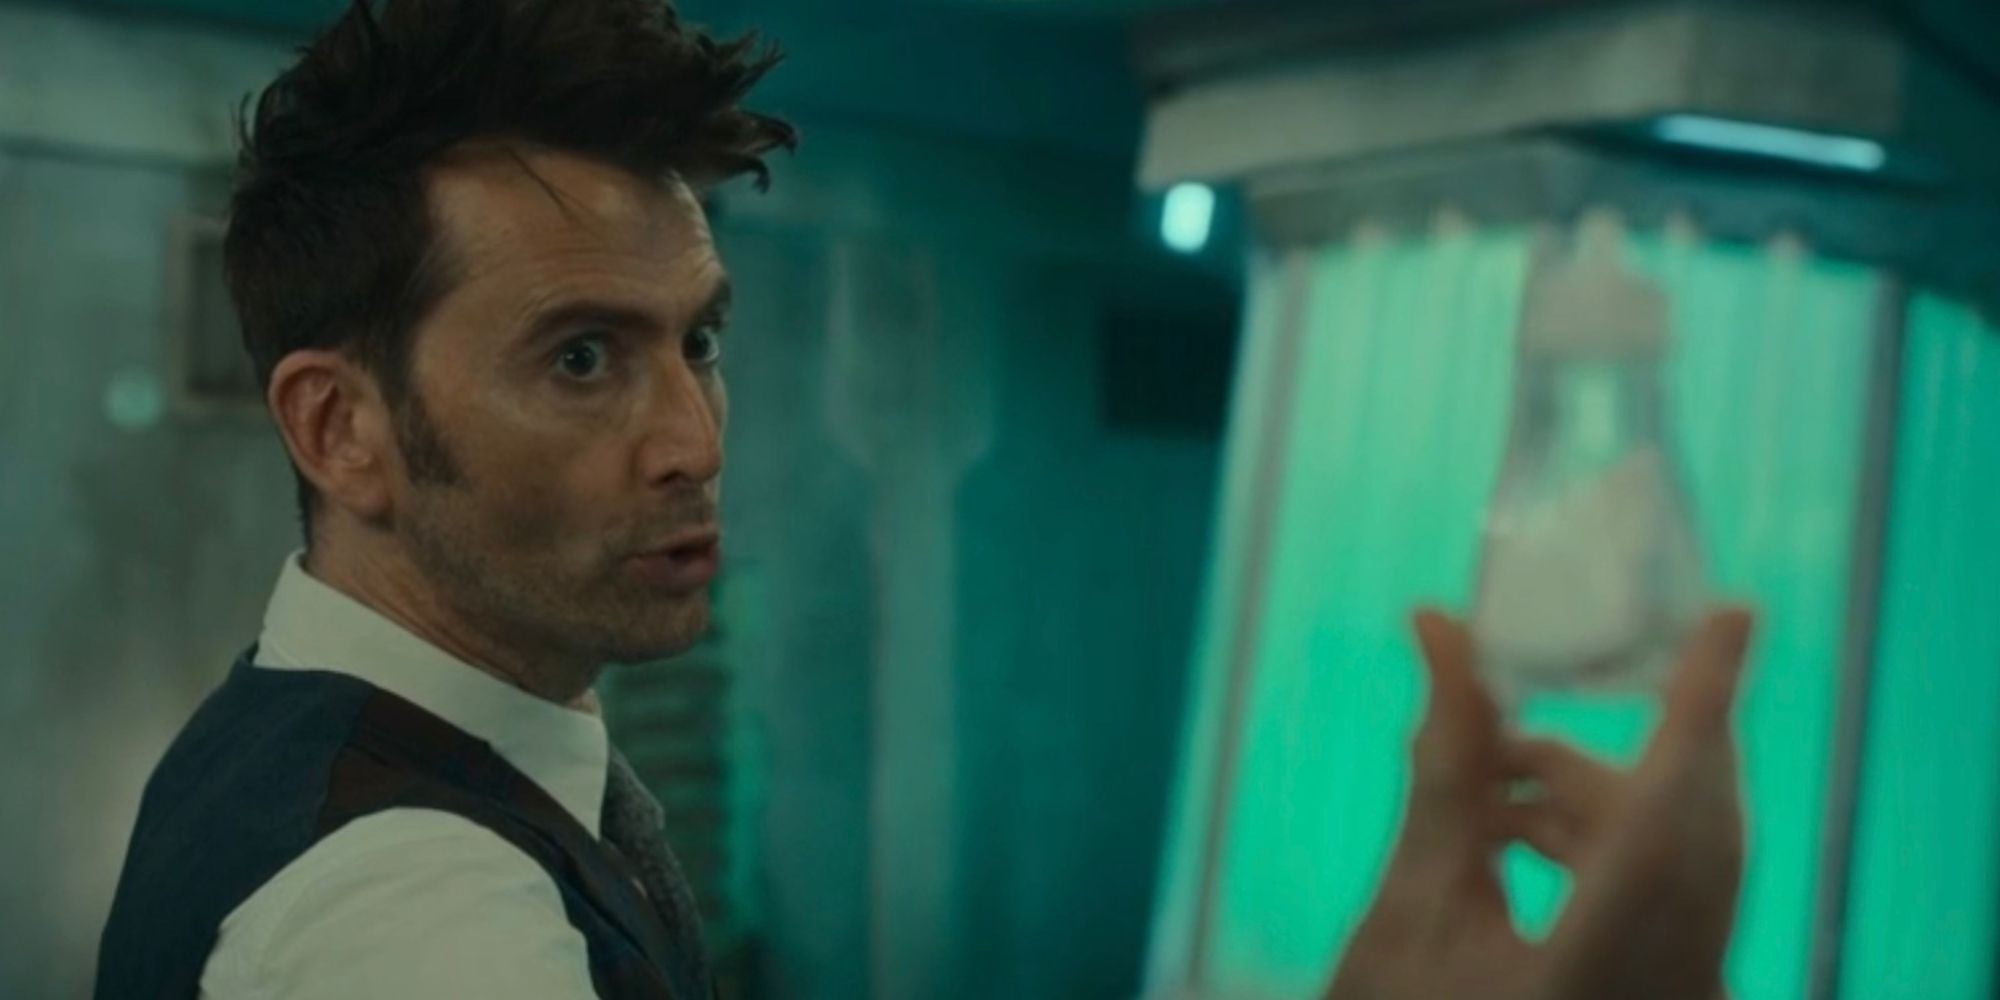 David Tennant as the Doctor in Doctor Who Wild Blue Yonder, the Doctor is holding a salt shaker